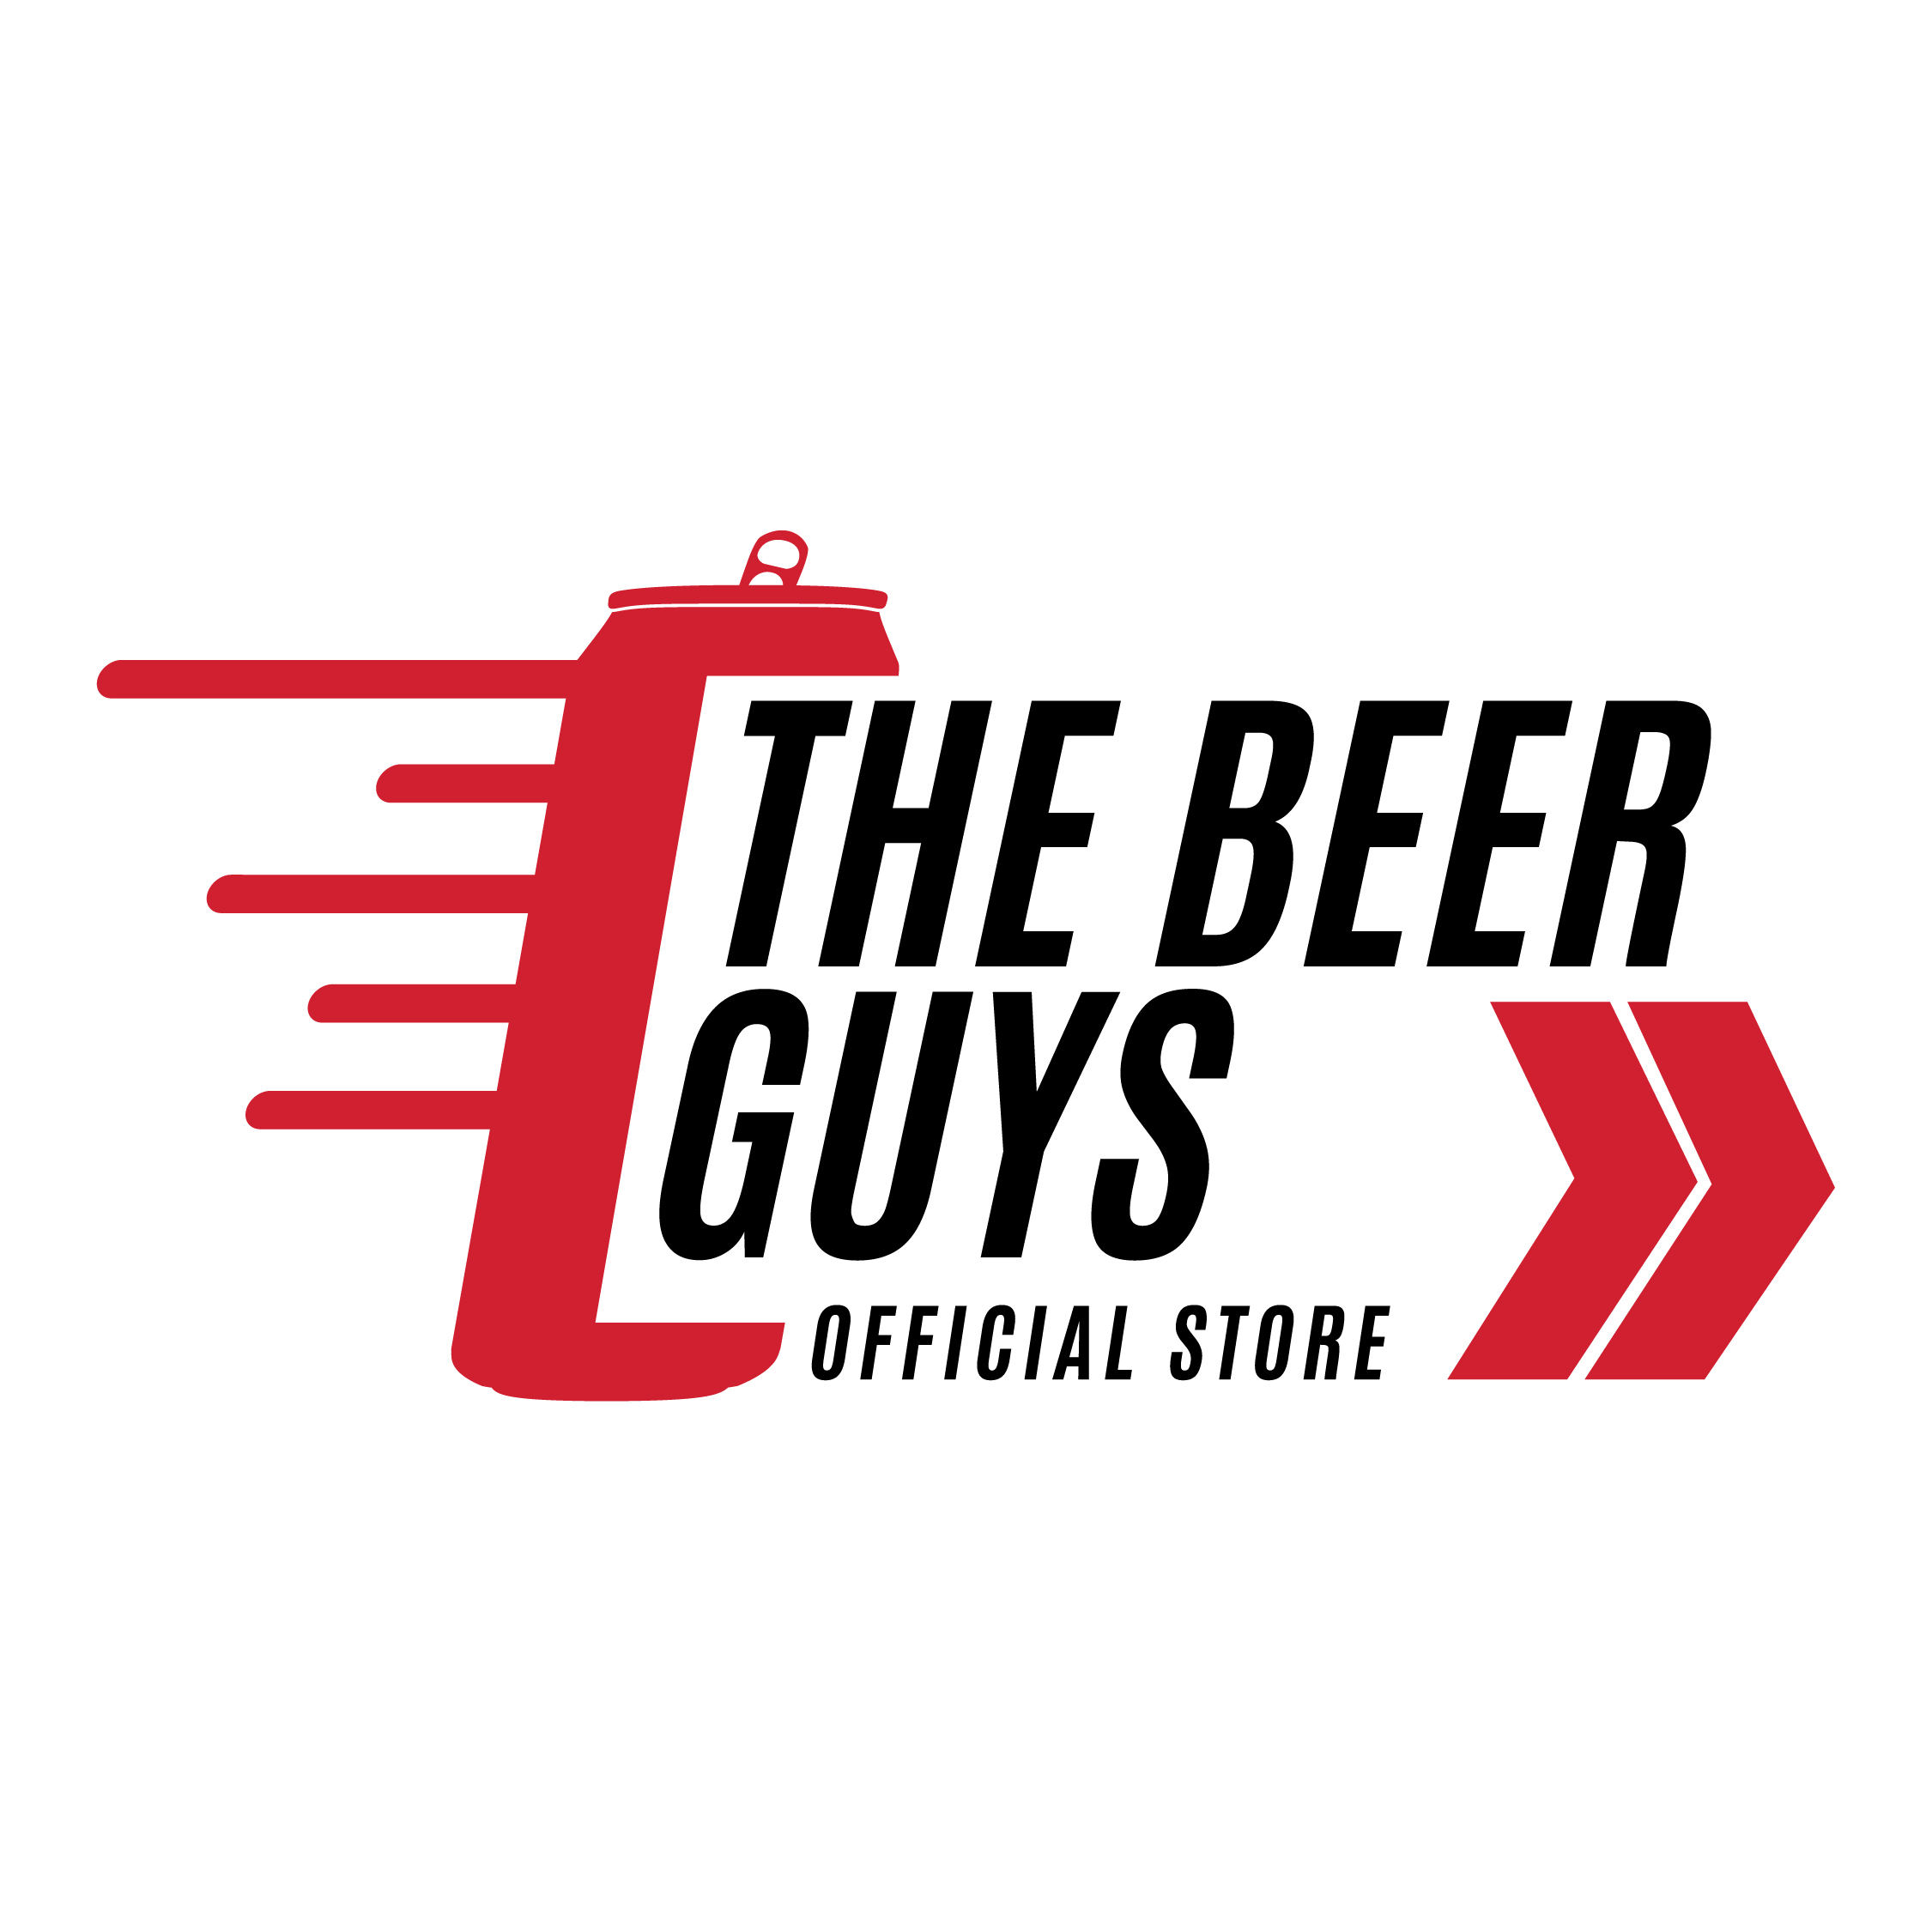 The Beer Guys Bali Official Store